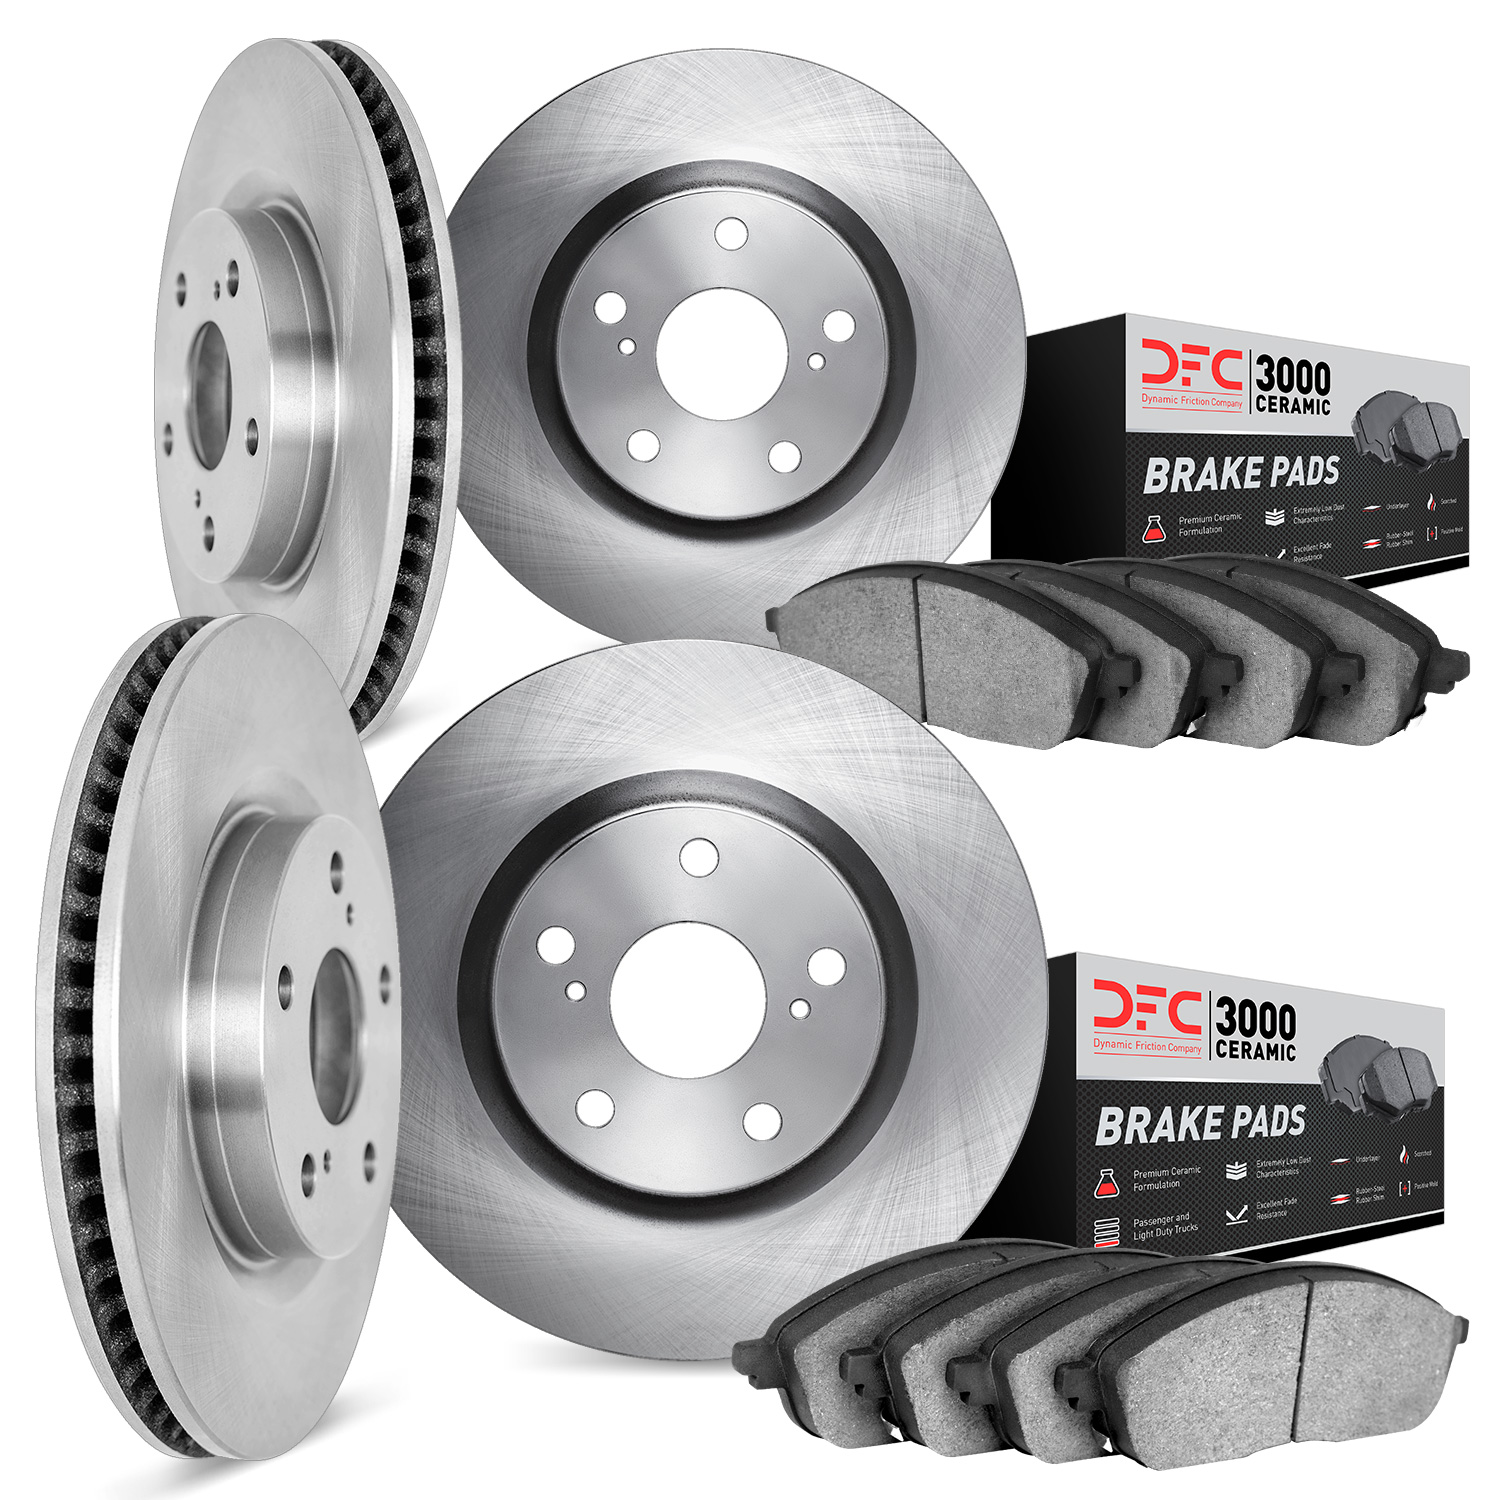 6304-67047 Brake Rotors with 3000-Series Ceramic Brake Pads Kit, 2005-2020 Infiniti/Nissan, Position: Front and Rear